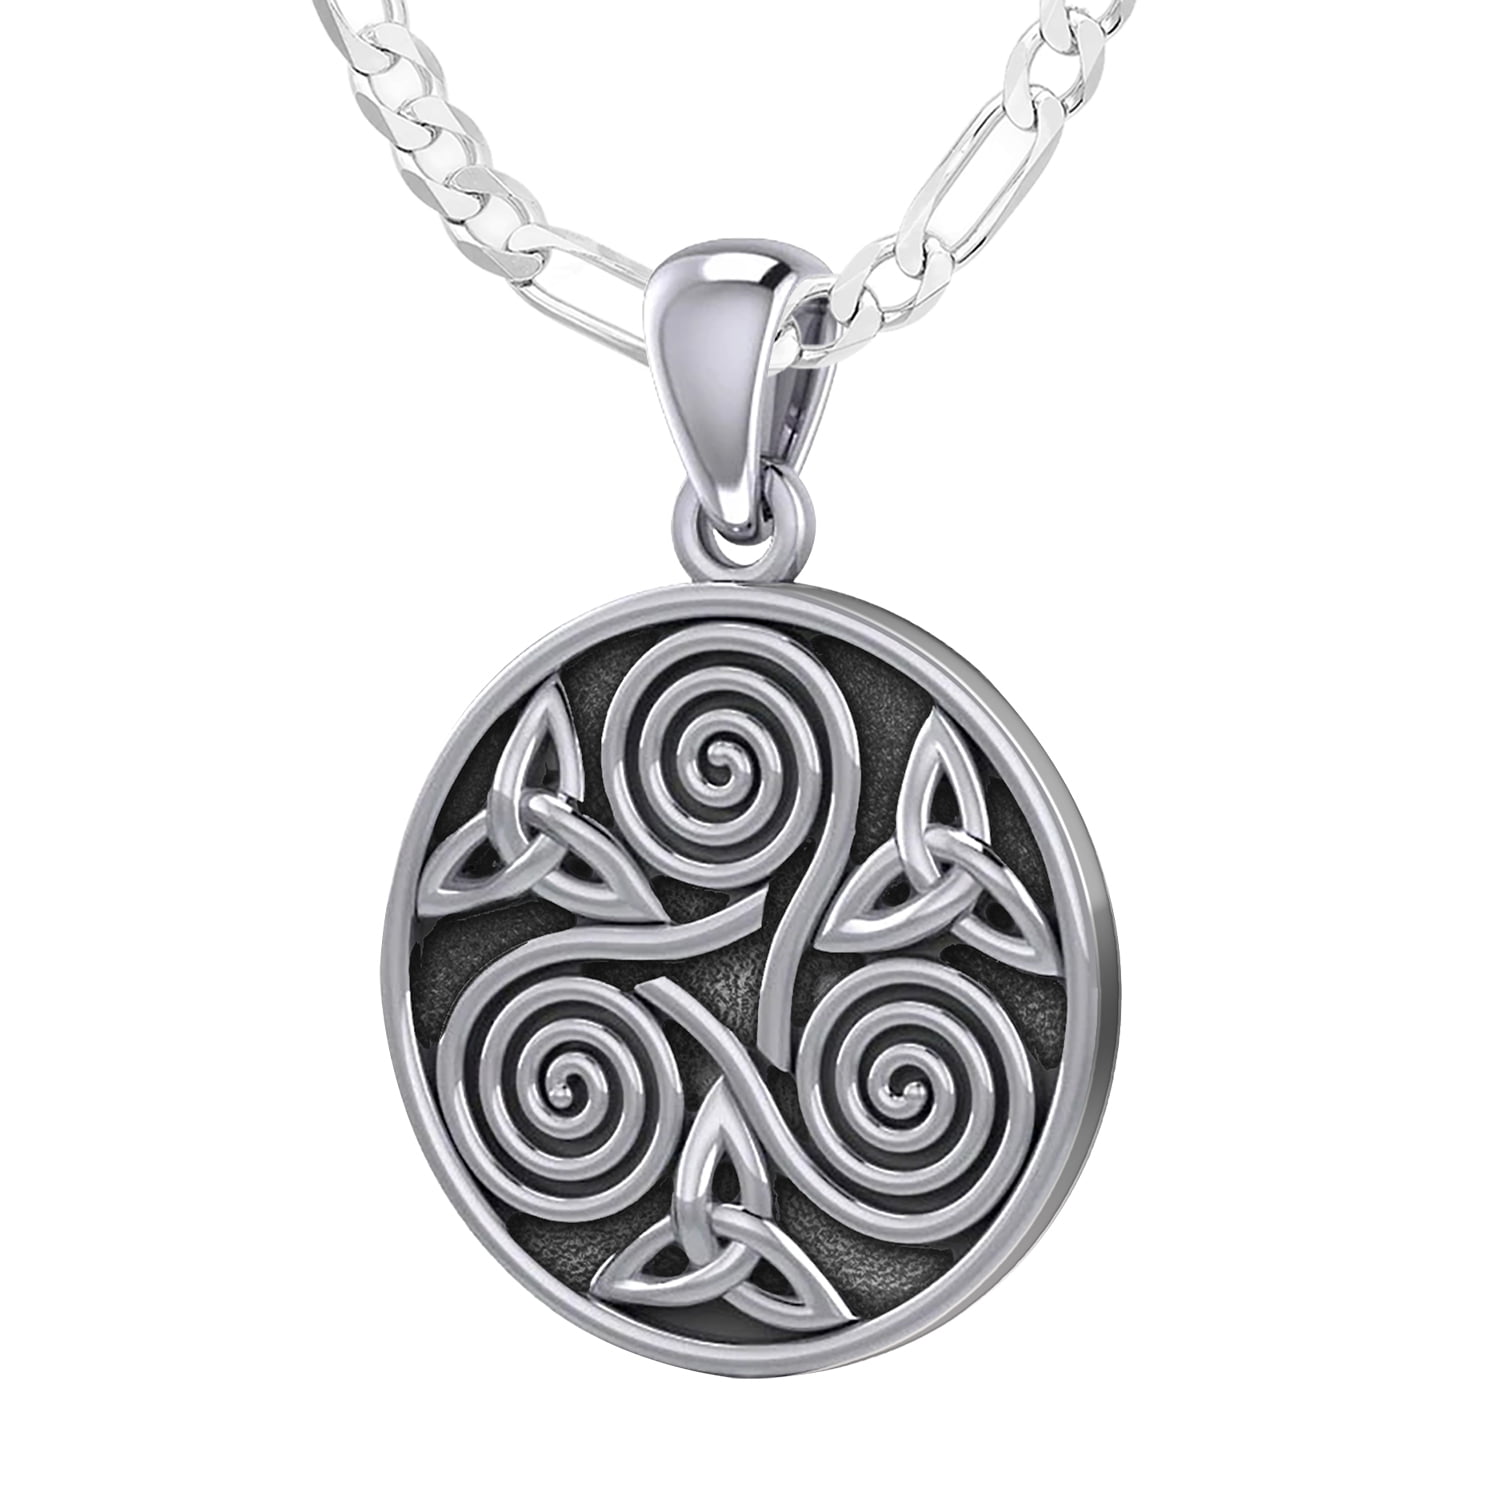 LARGE CELTIC,IRISH,TRINITY KNOT PENDANT & NECKLACE OTHER NECKLACE CHOICES 